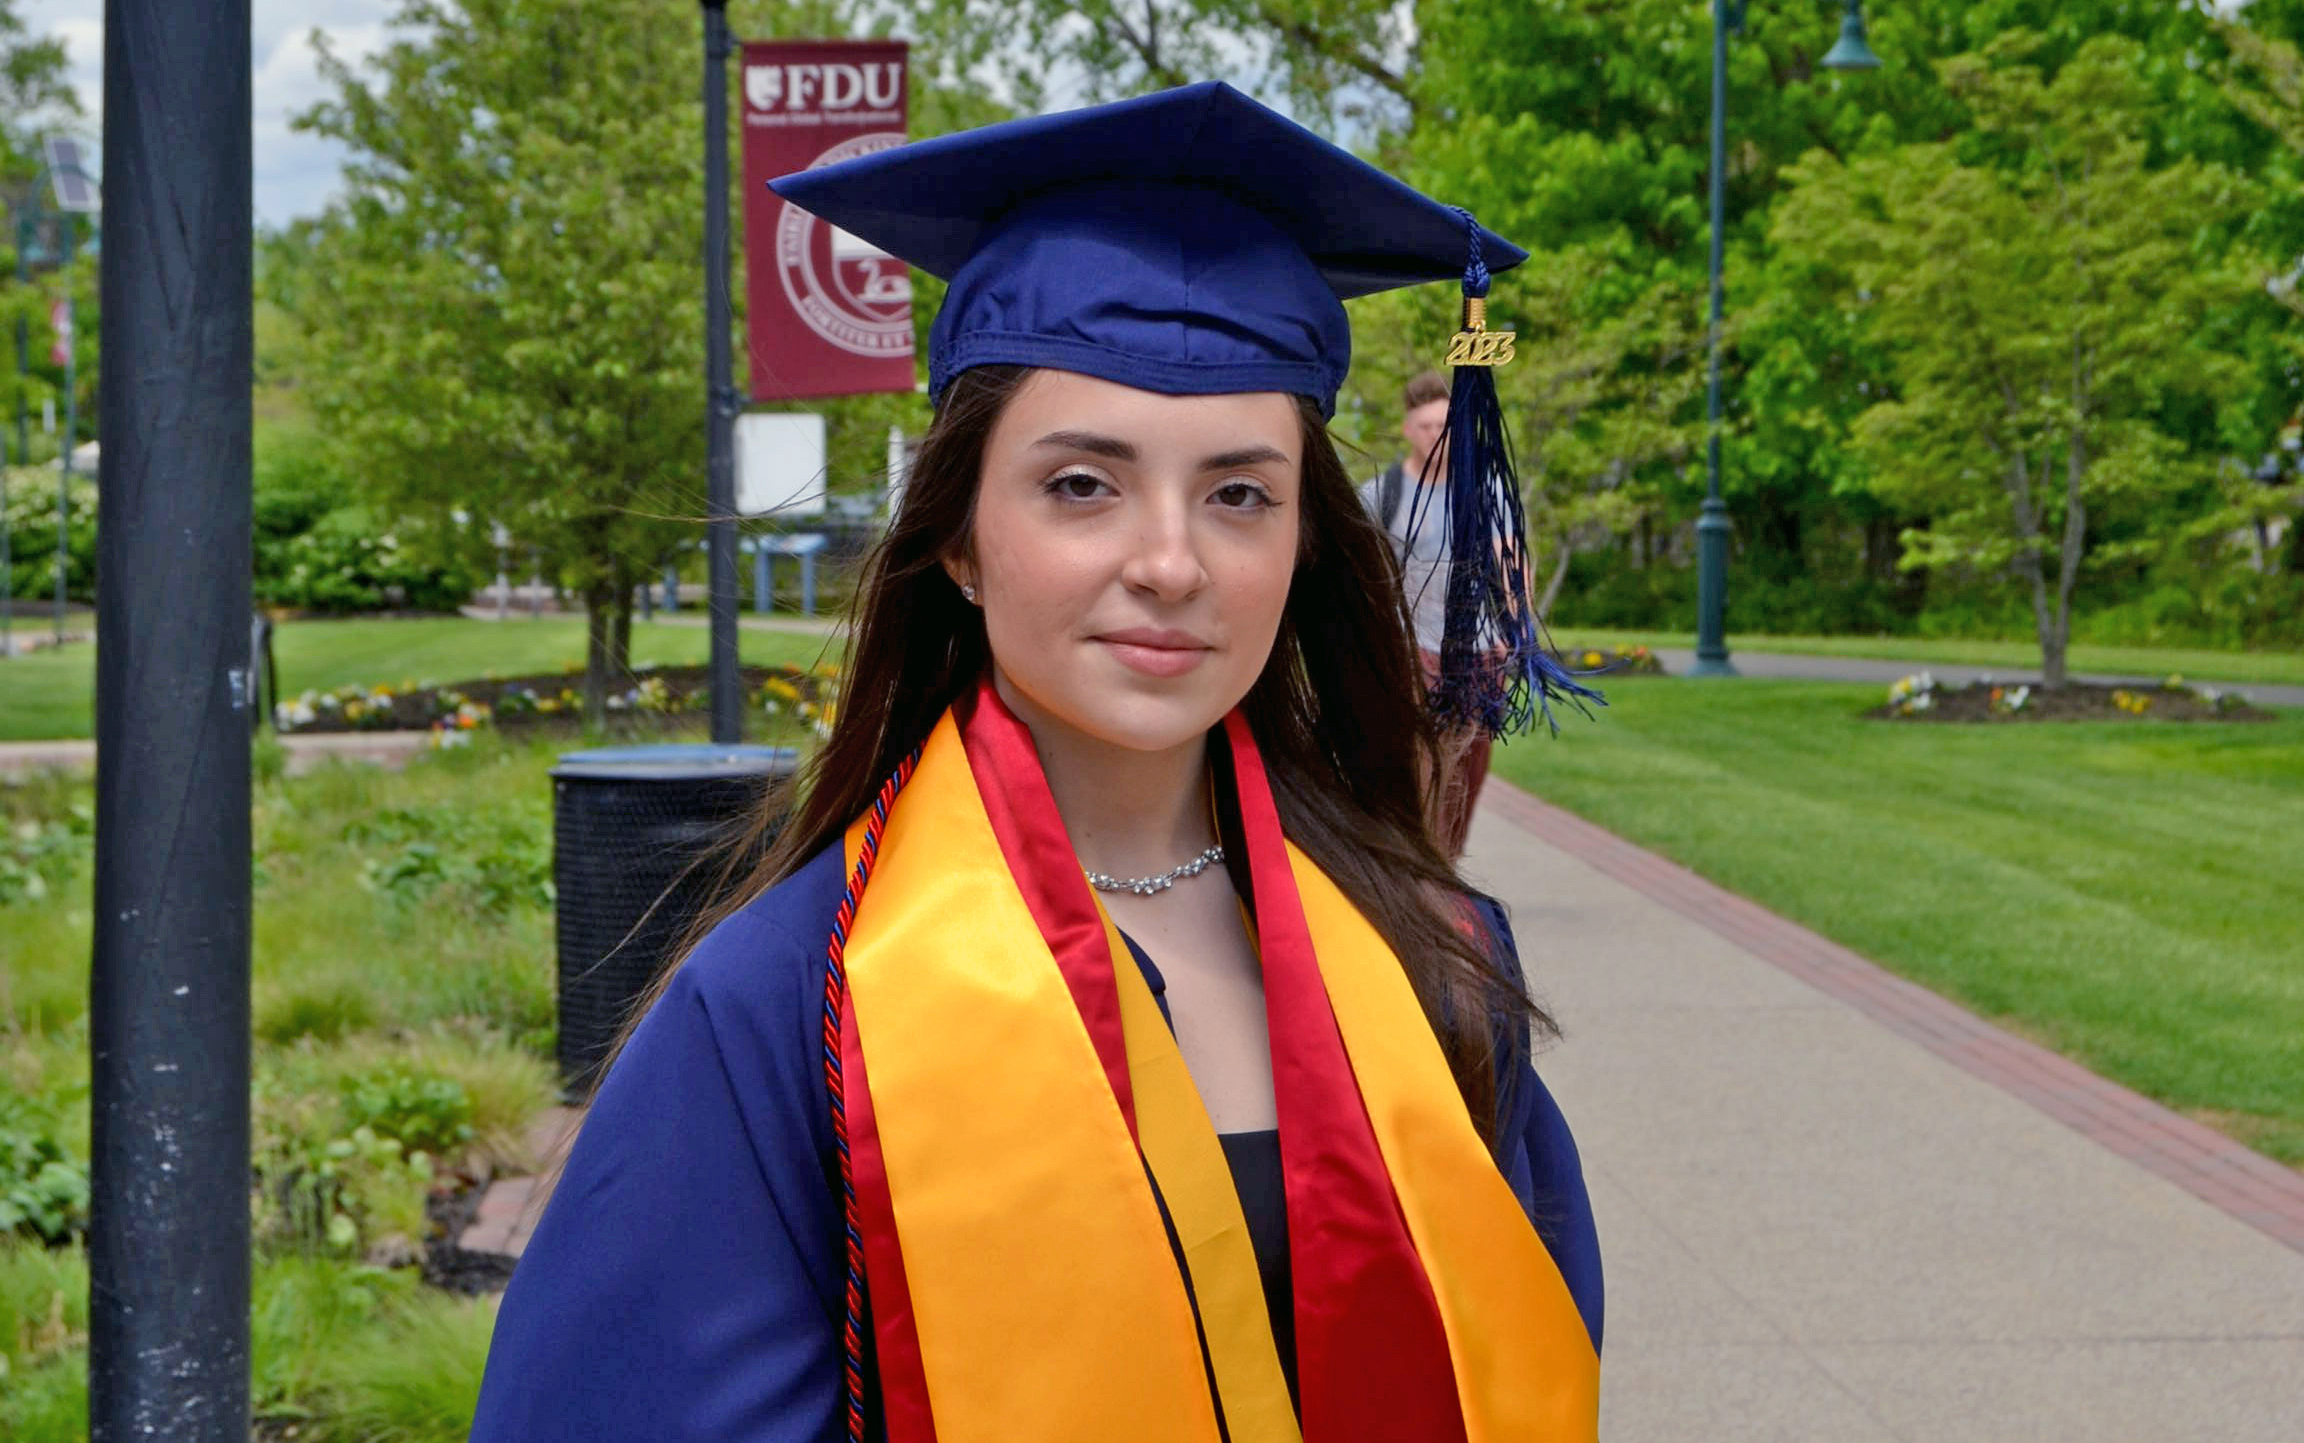 A young woman wears academic regalia — a cap, gown, cords and sashes — and stands outside.